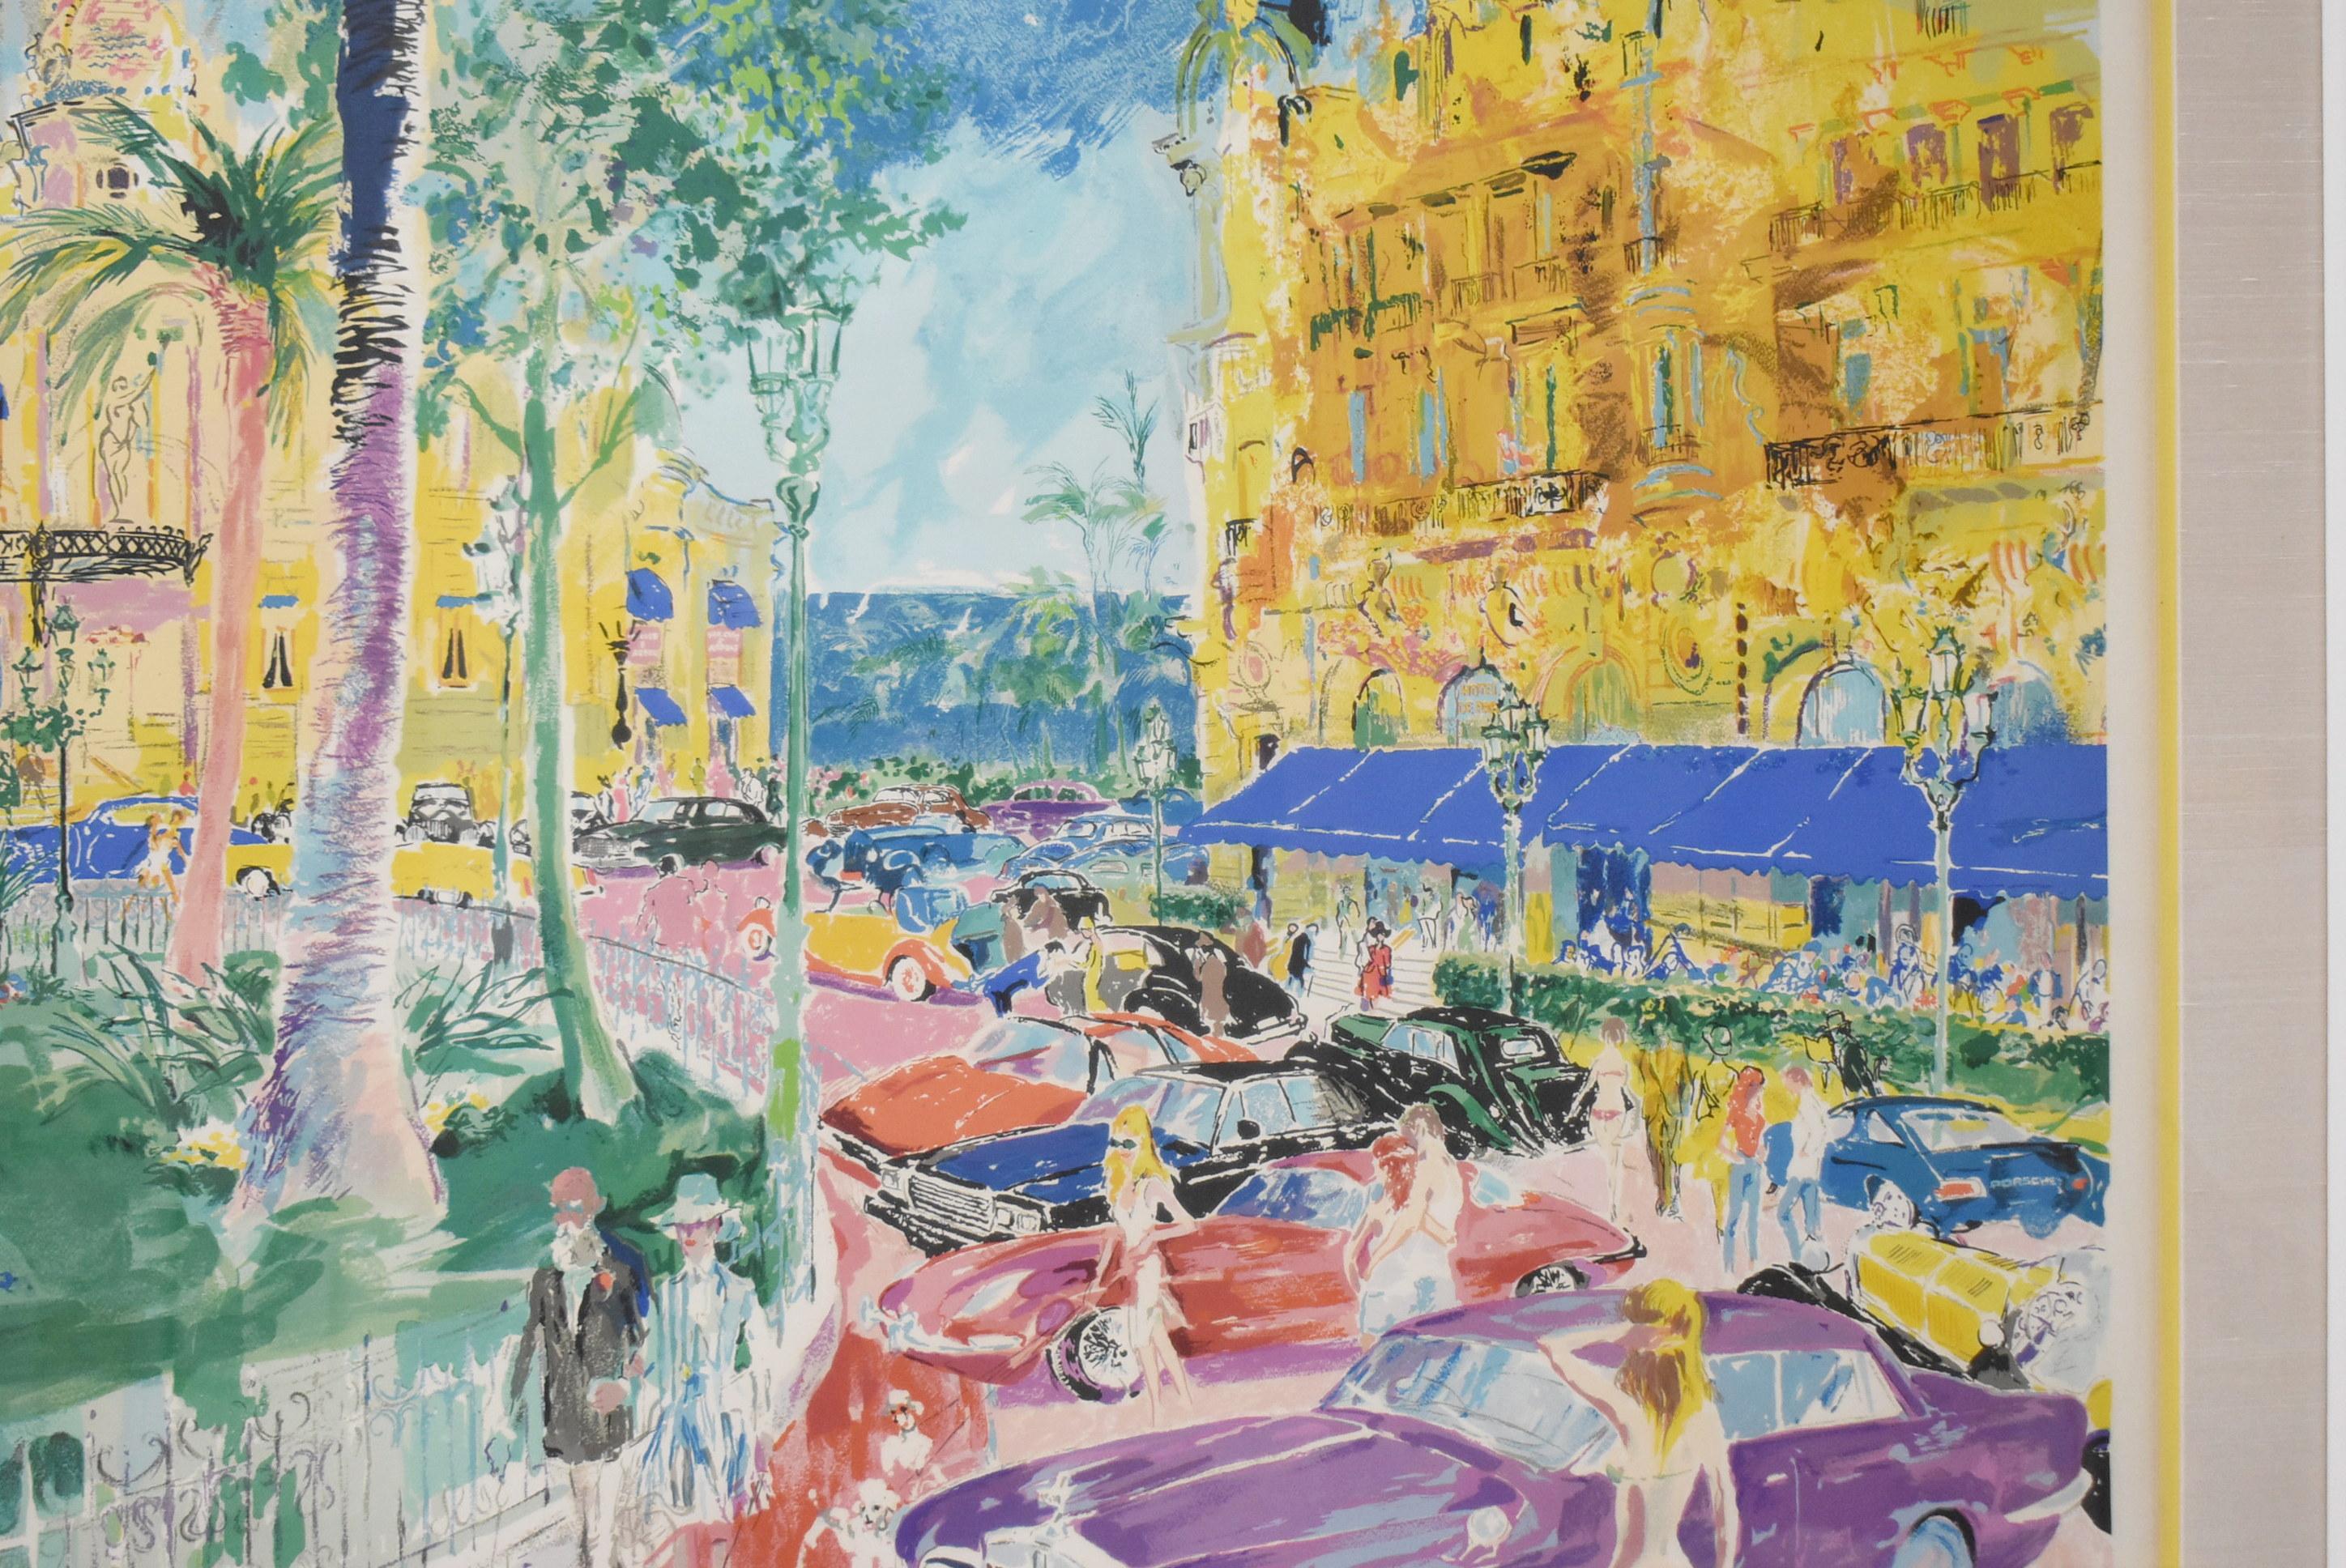 LeRoy Neiman 1921-2012 Color Serigraph Monte Carlo 1982. Signed in pencil lower right and numbered 15/300. Double matted. Image size 27